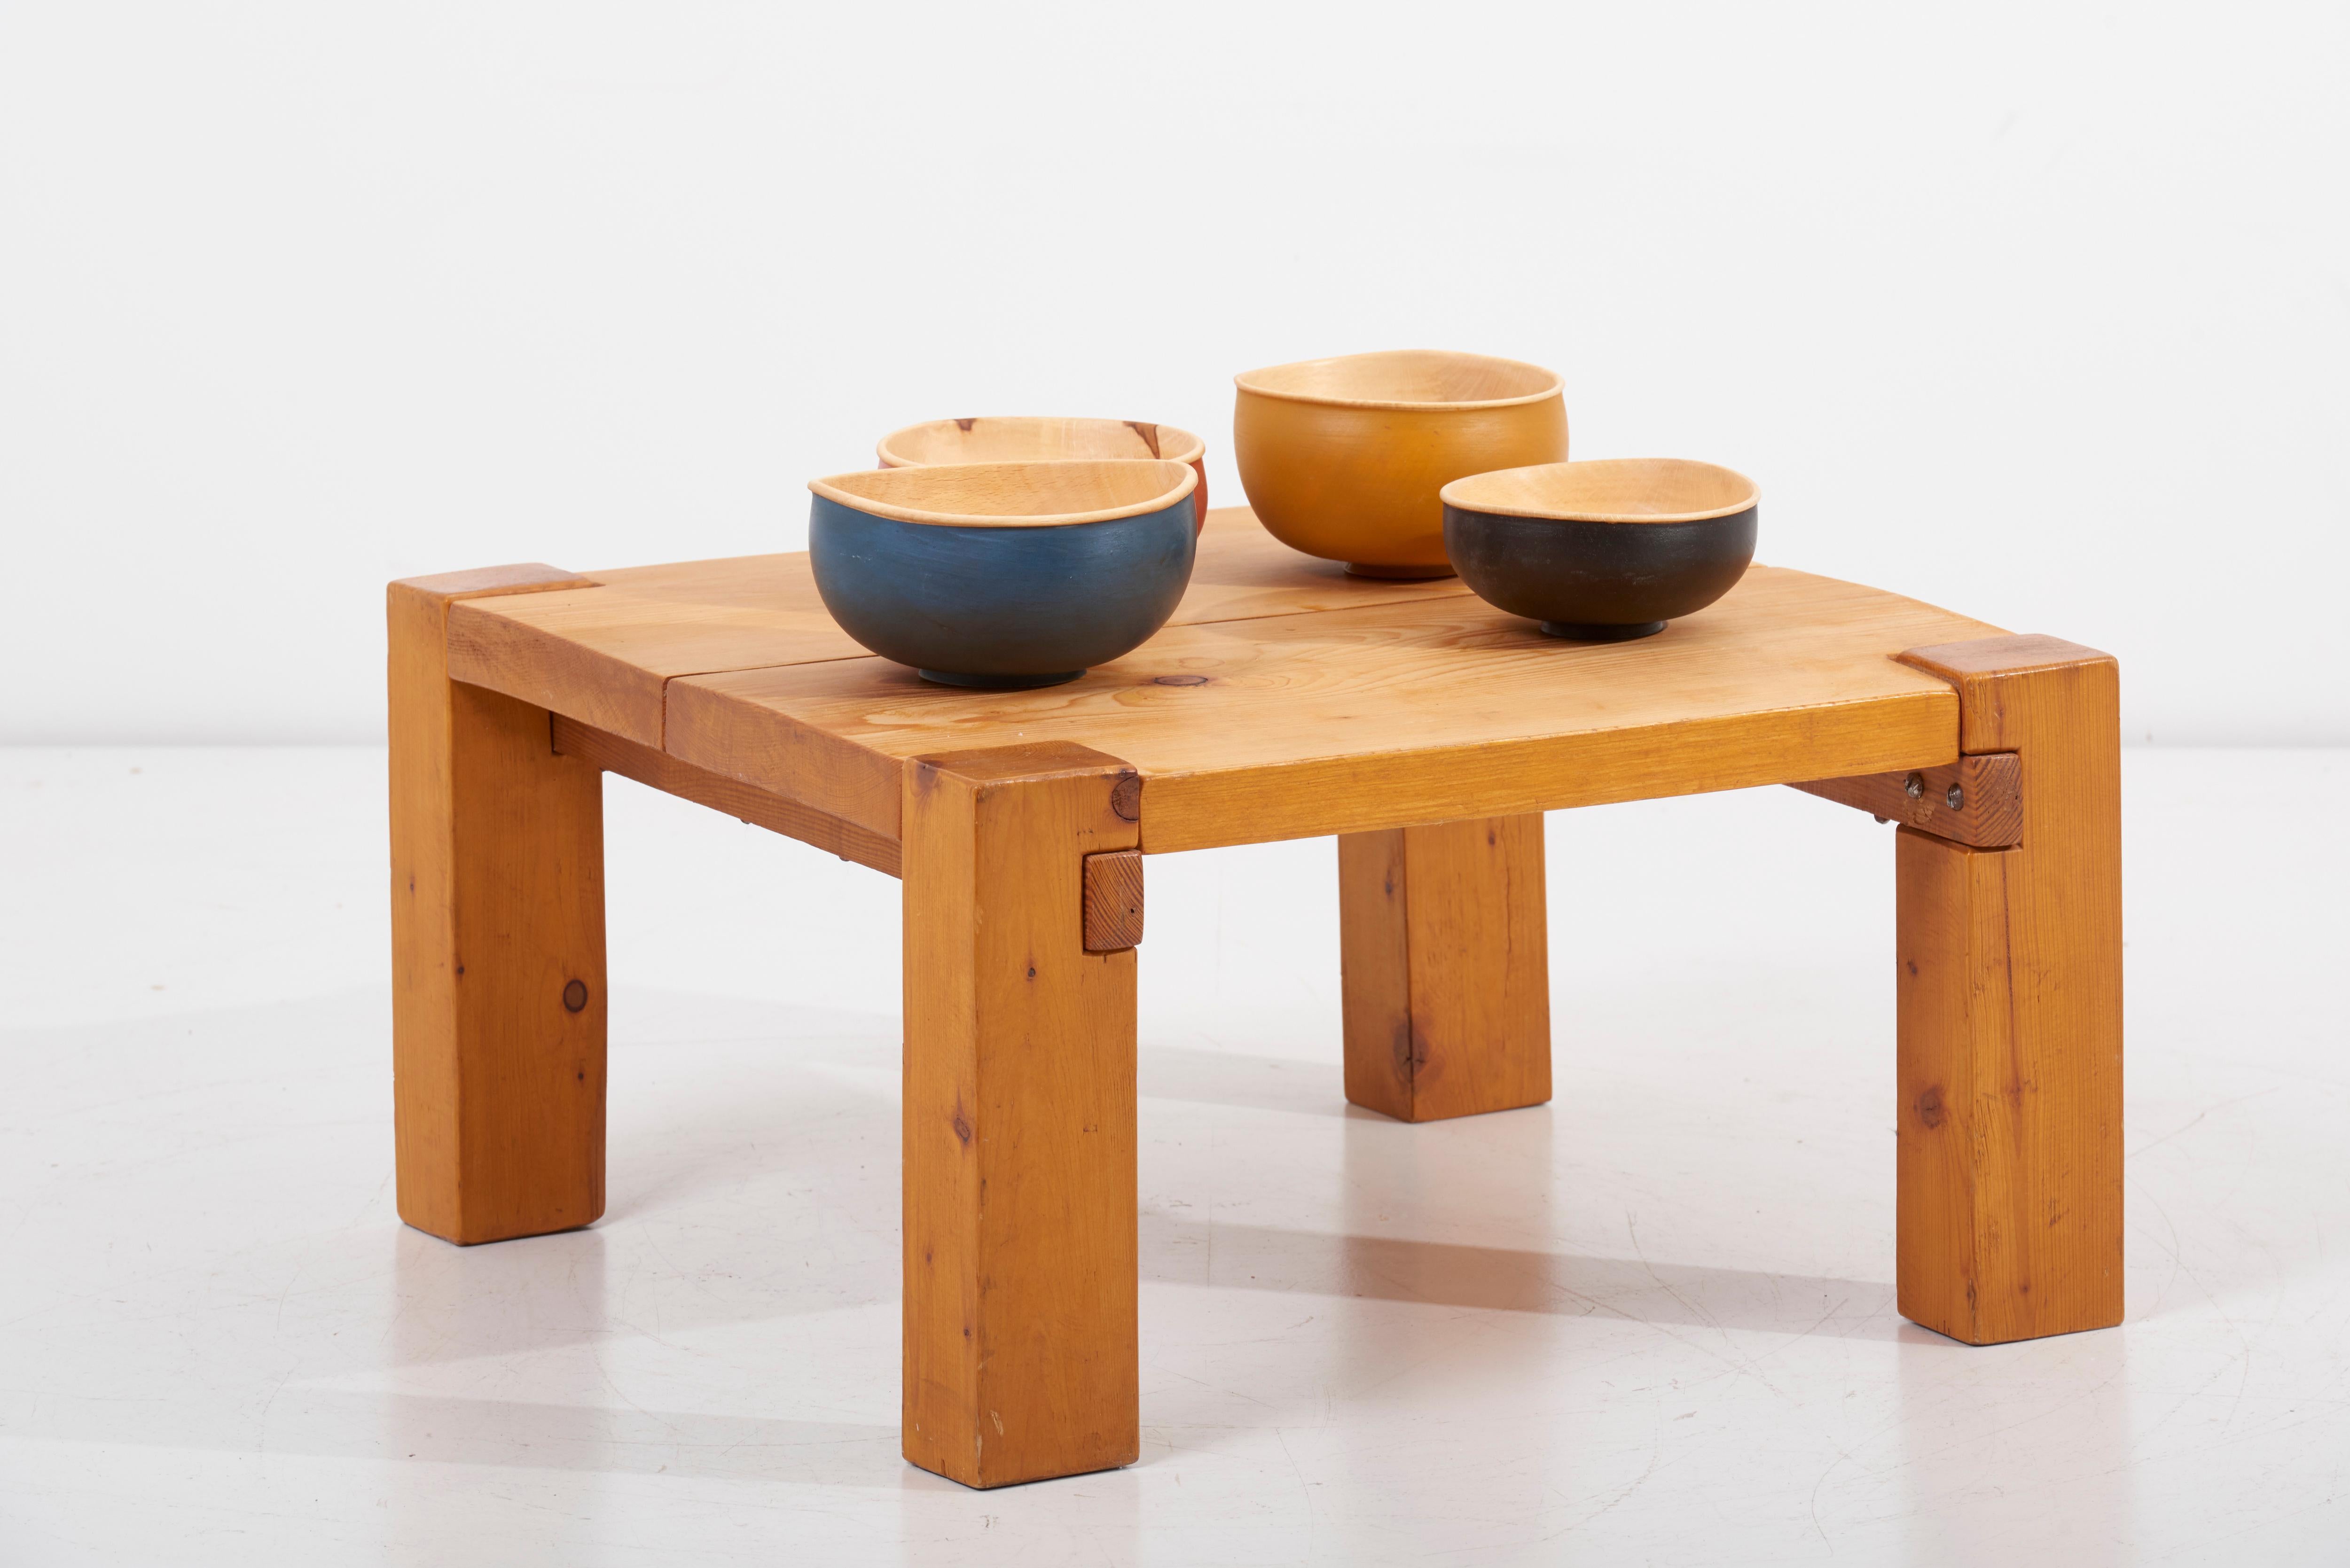 Set of 4 different colored handcrafted wooden bowls by Fabian Fischer, Germany, 2020.
Made of beech wood with paint outside.
The dimensions given apply to the largest bowl.